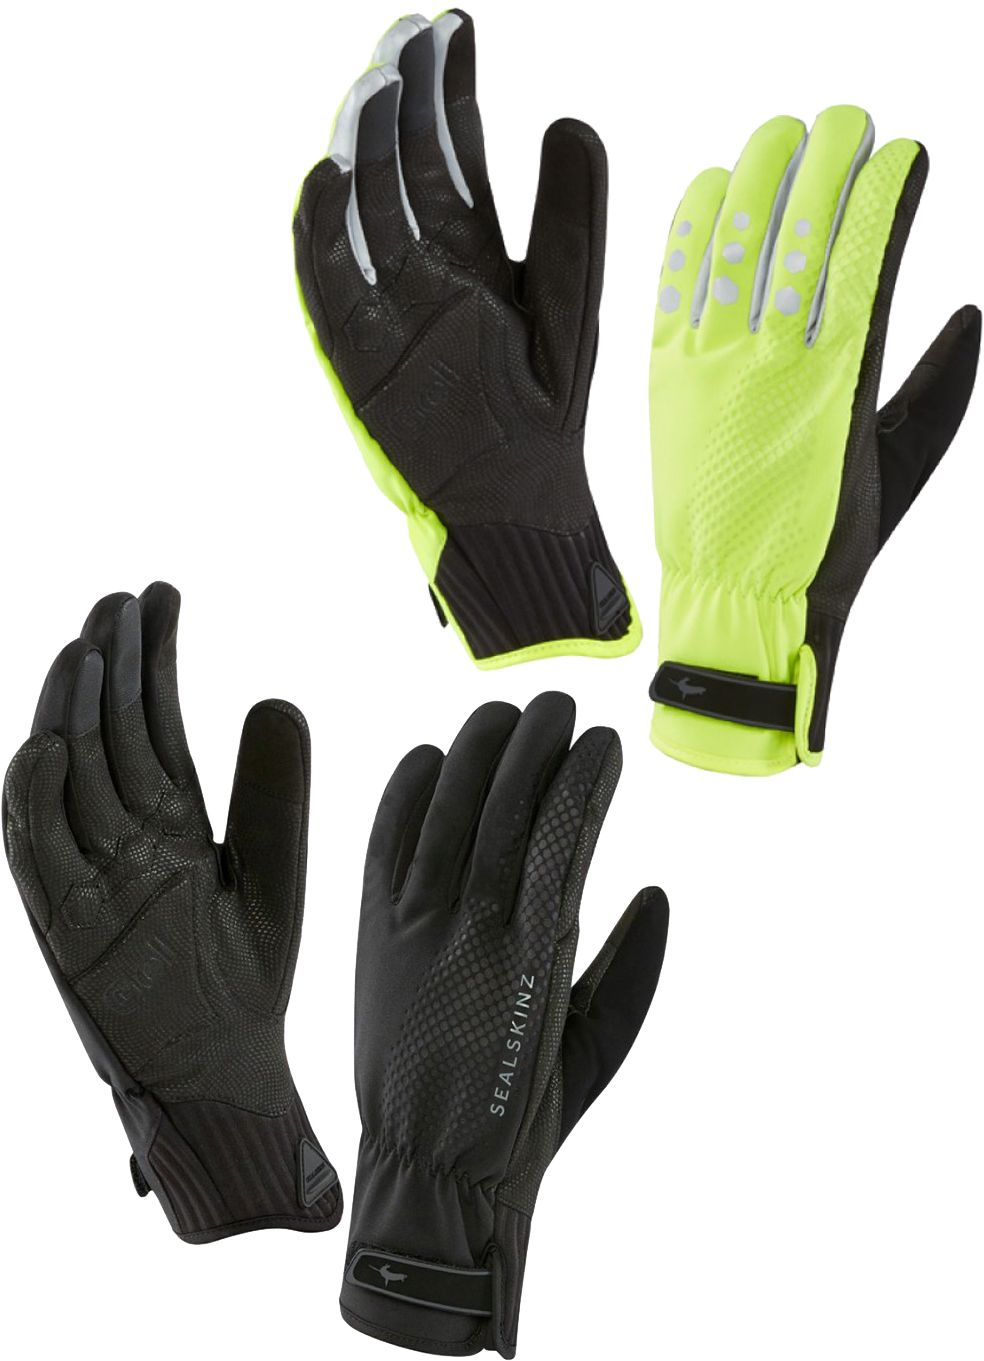 waterproof all weather cycle glove